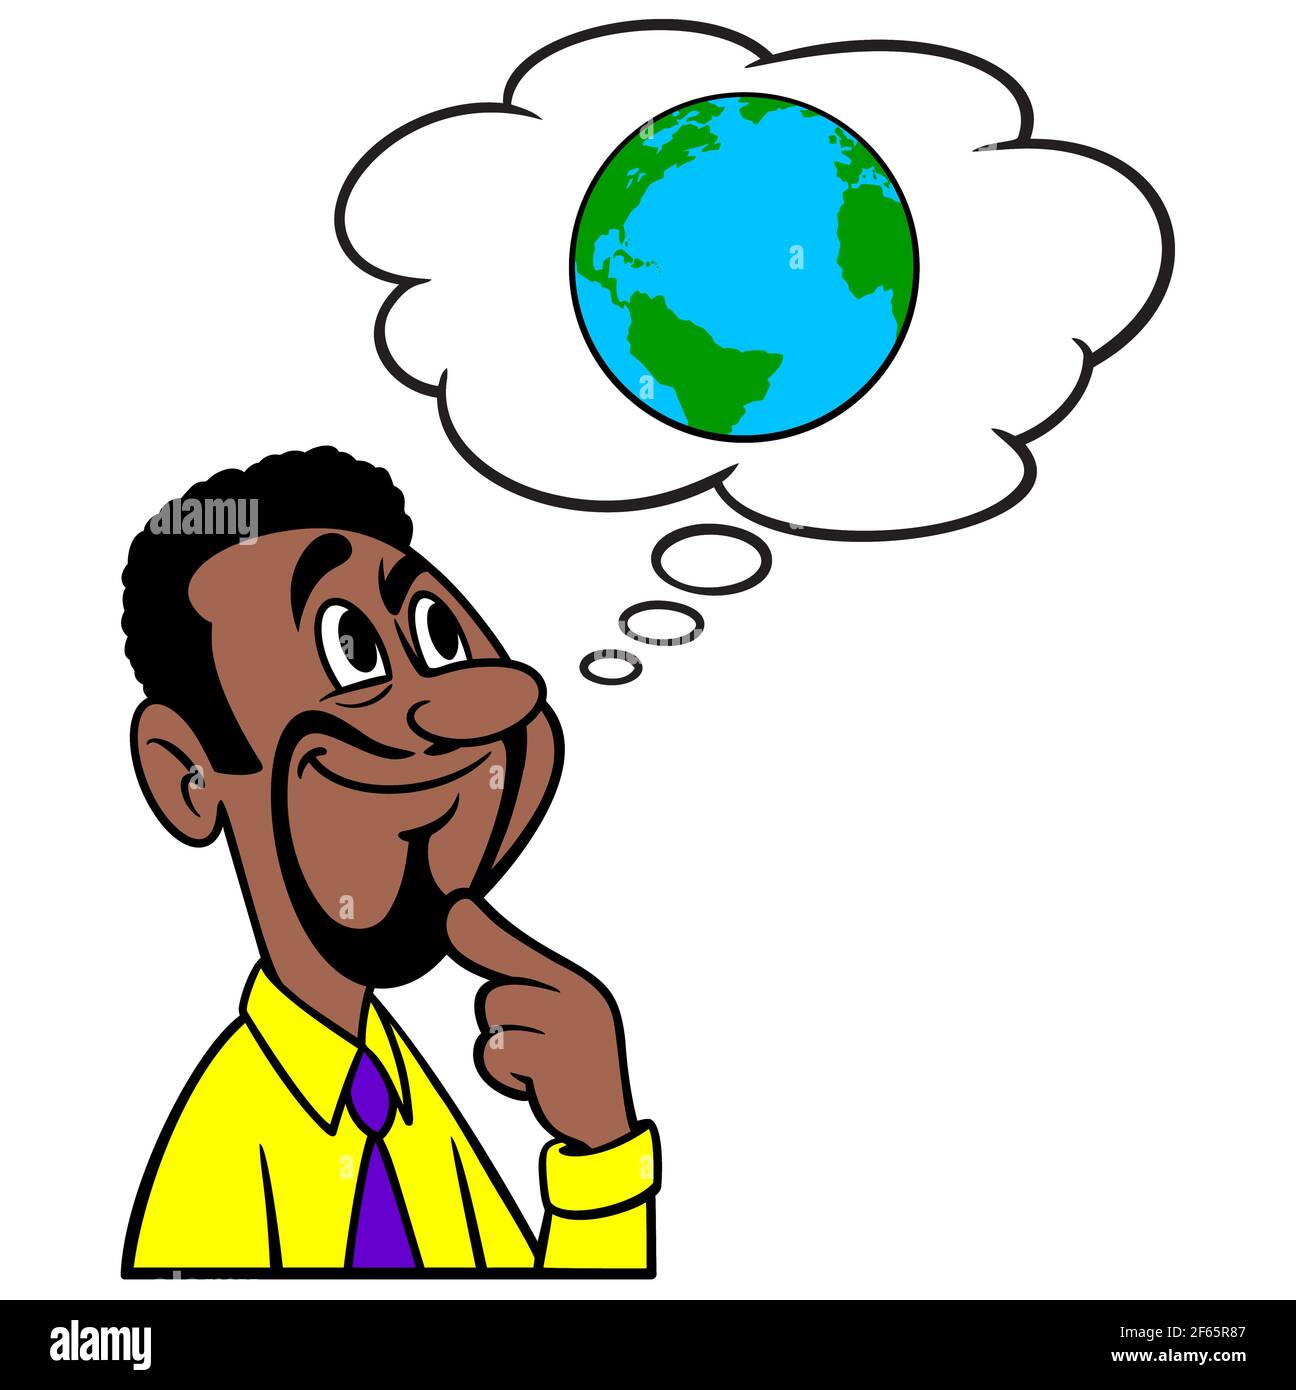 Man thinking about Climate Change Conspiracy - A cartoon illustration of a man thinking about Climate Change Conspiracy. Stock Vector